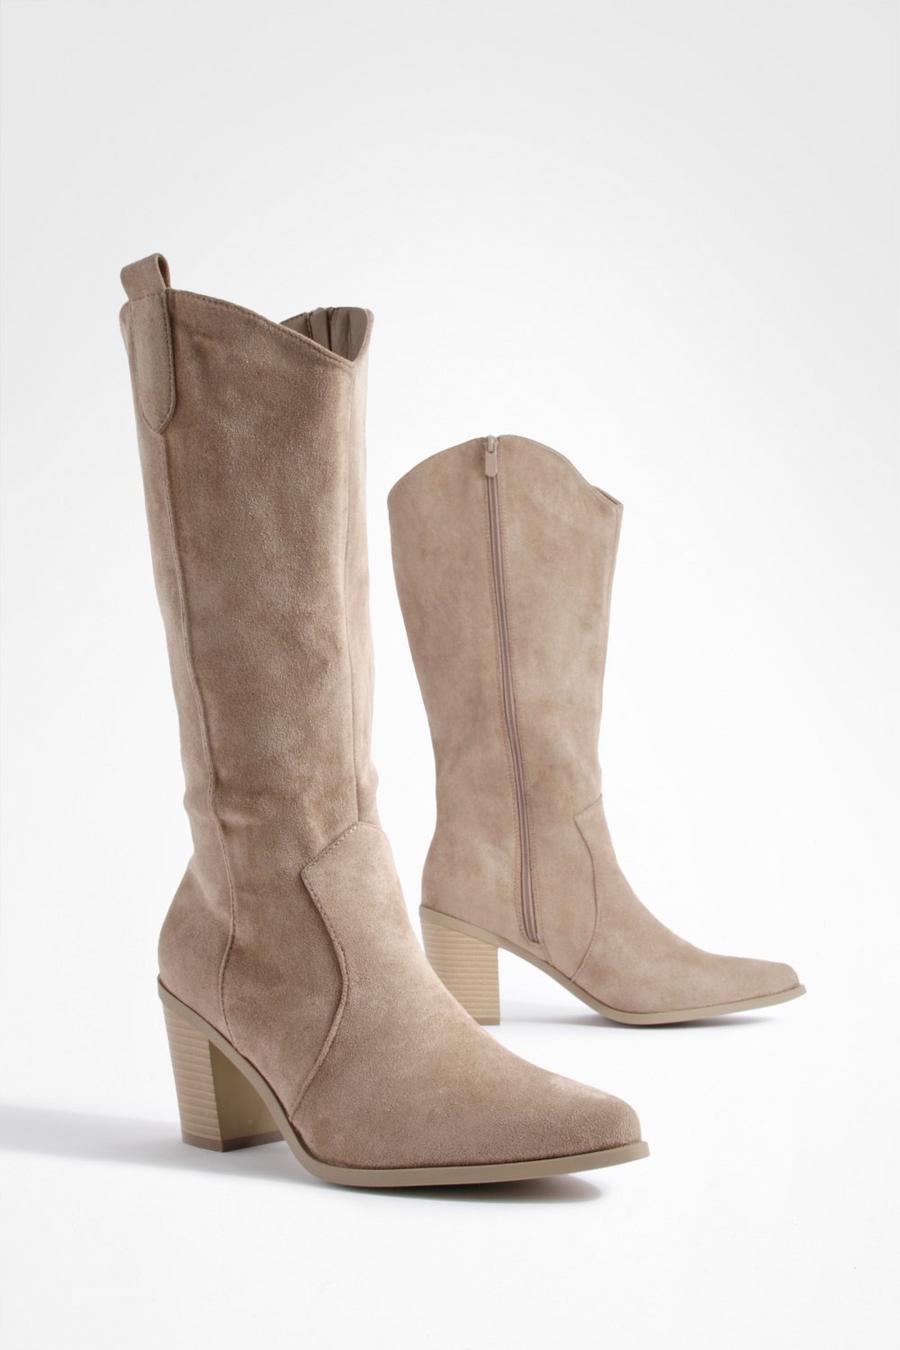 Taupe Tab Detail Knee High Western Cowboy Boots 